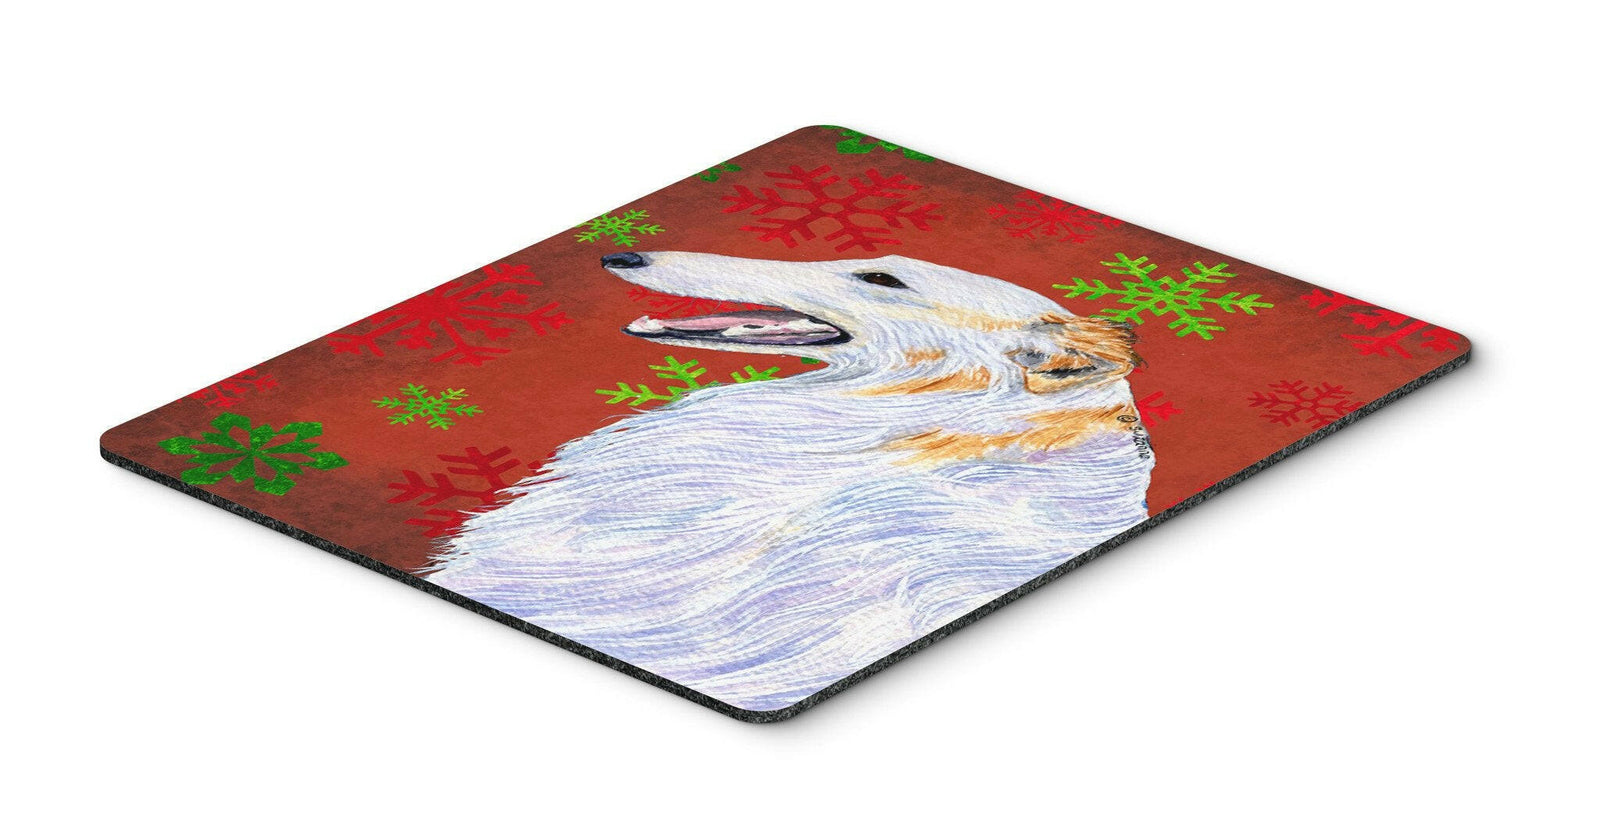 Borzoi Red and Green Snowflakes Holiday Christmas Mouse Pad, Hot Pad or Trivet by Caroline's Treasures